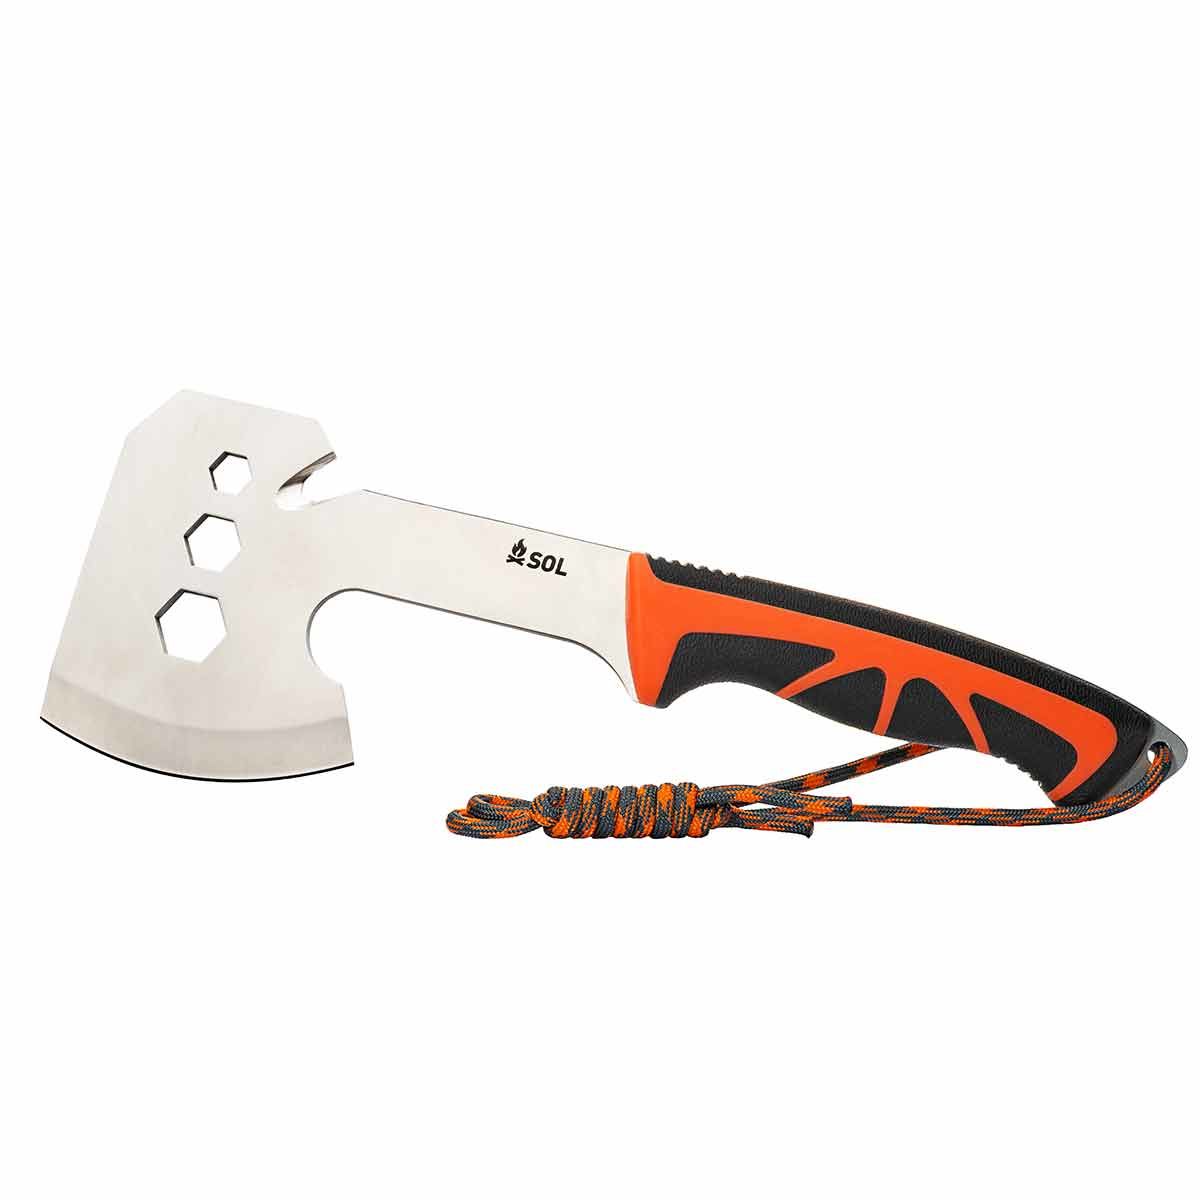 Hand Tool Ultimate Camping Tool-Survival Fishing Axe-Fire Axe 29 cm 